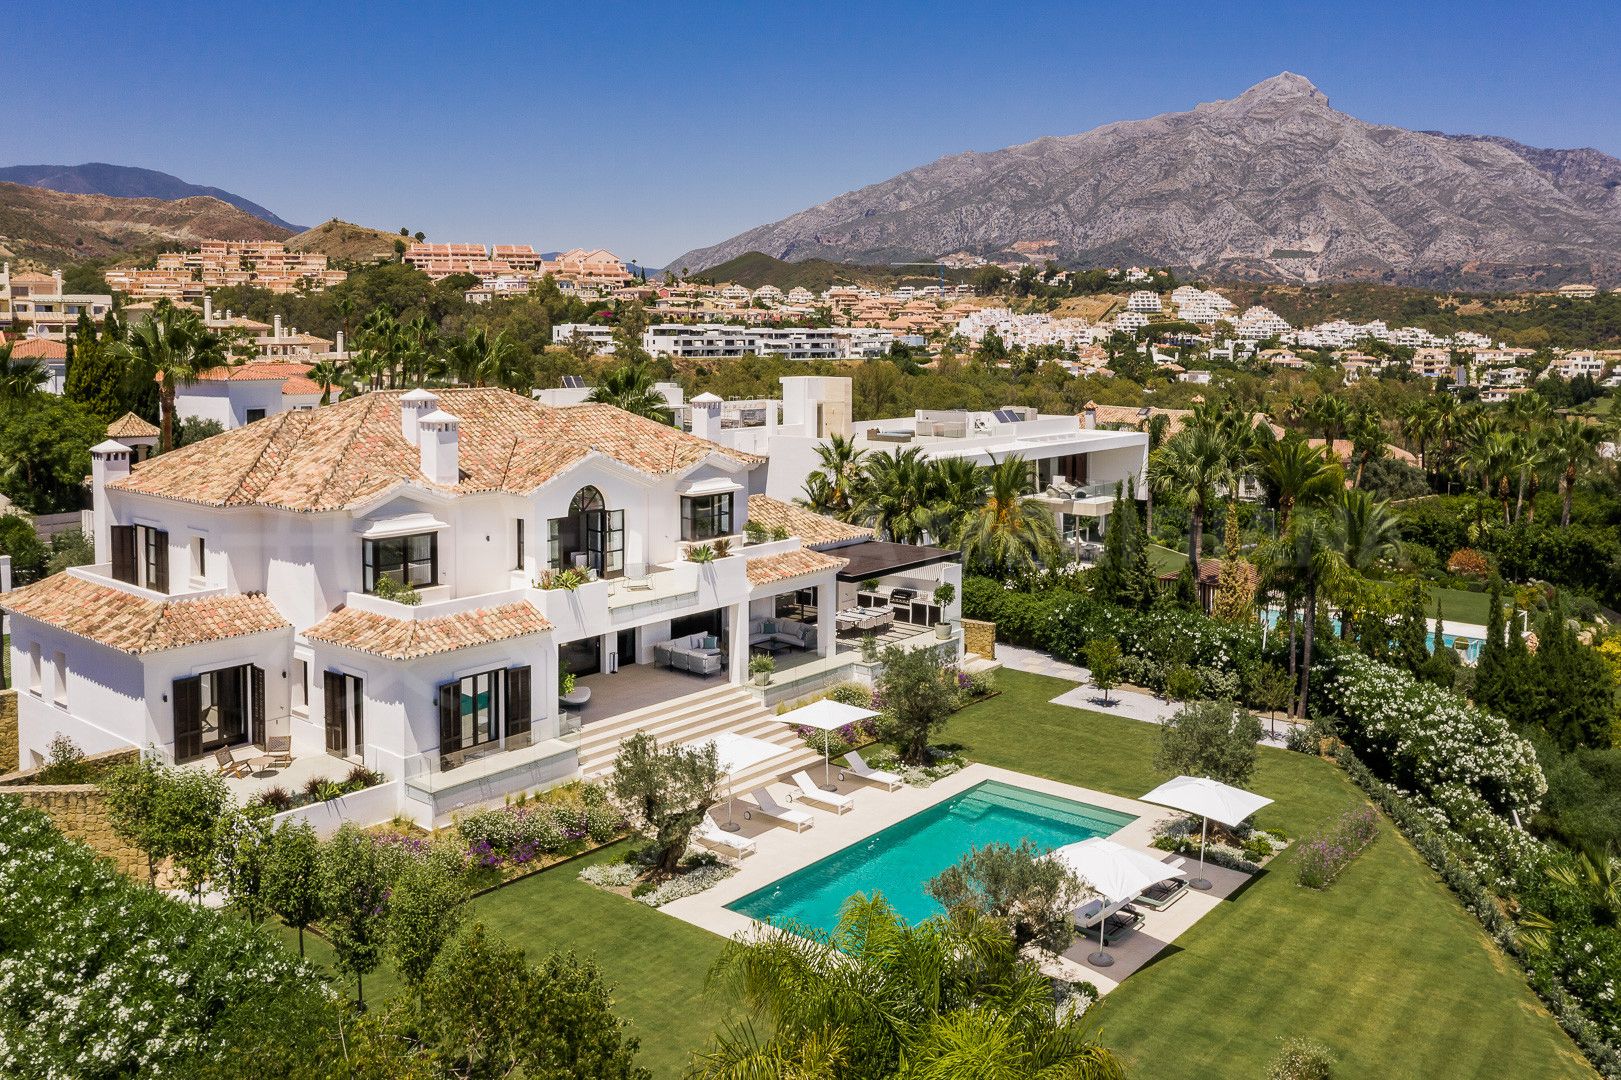 The Spanish Property Market is booming but what about UK buyers?